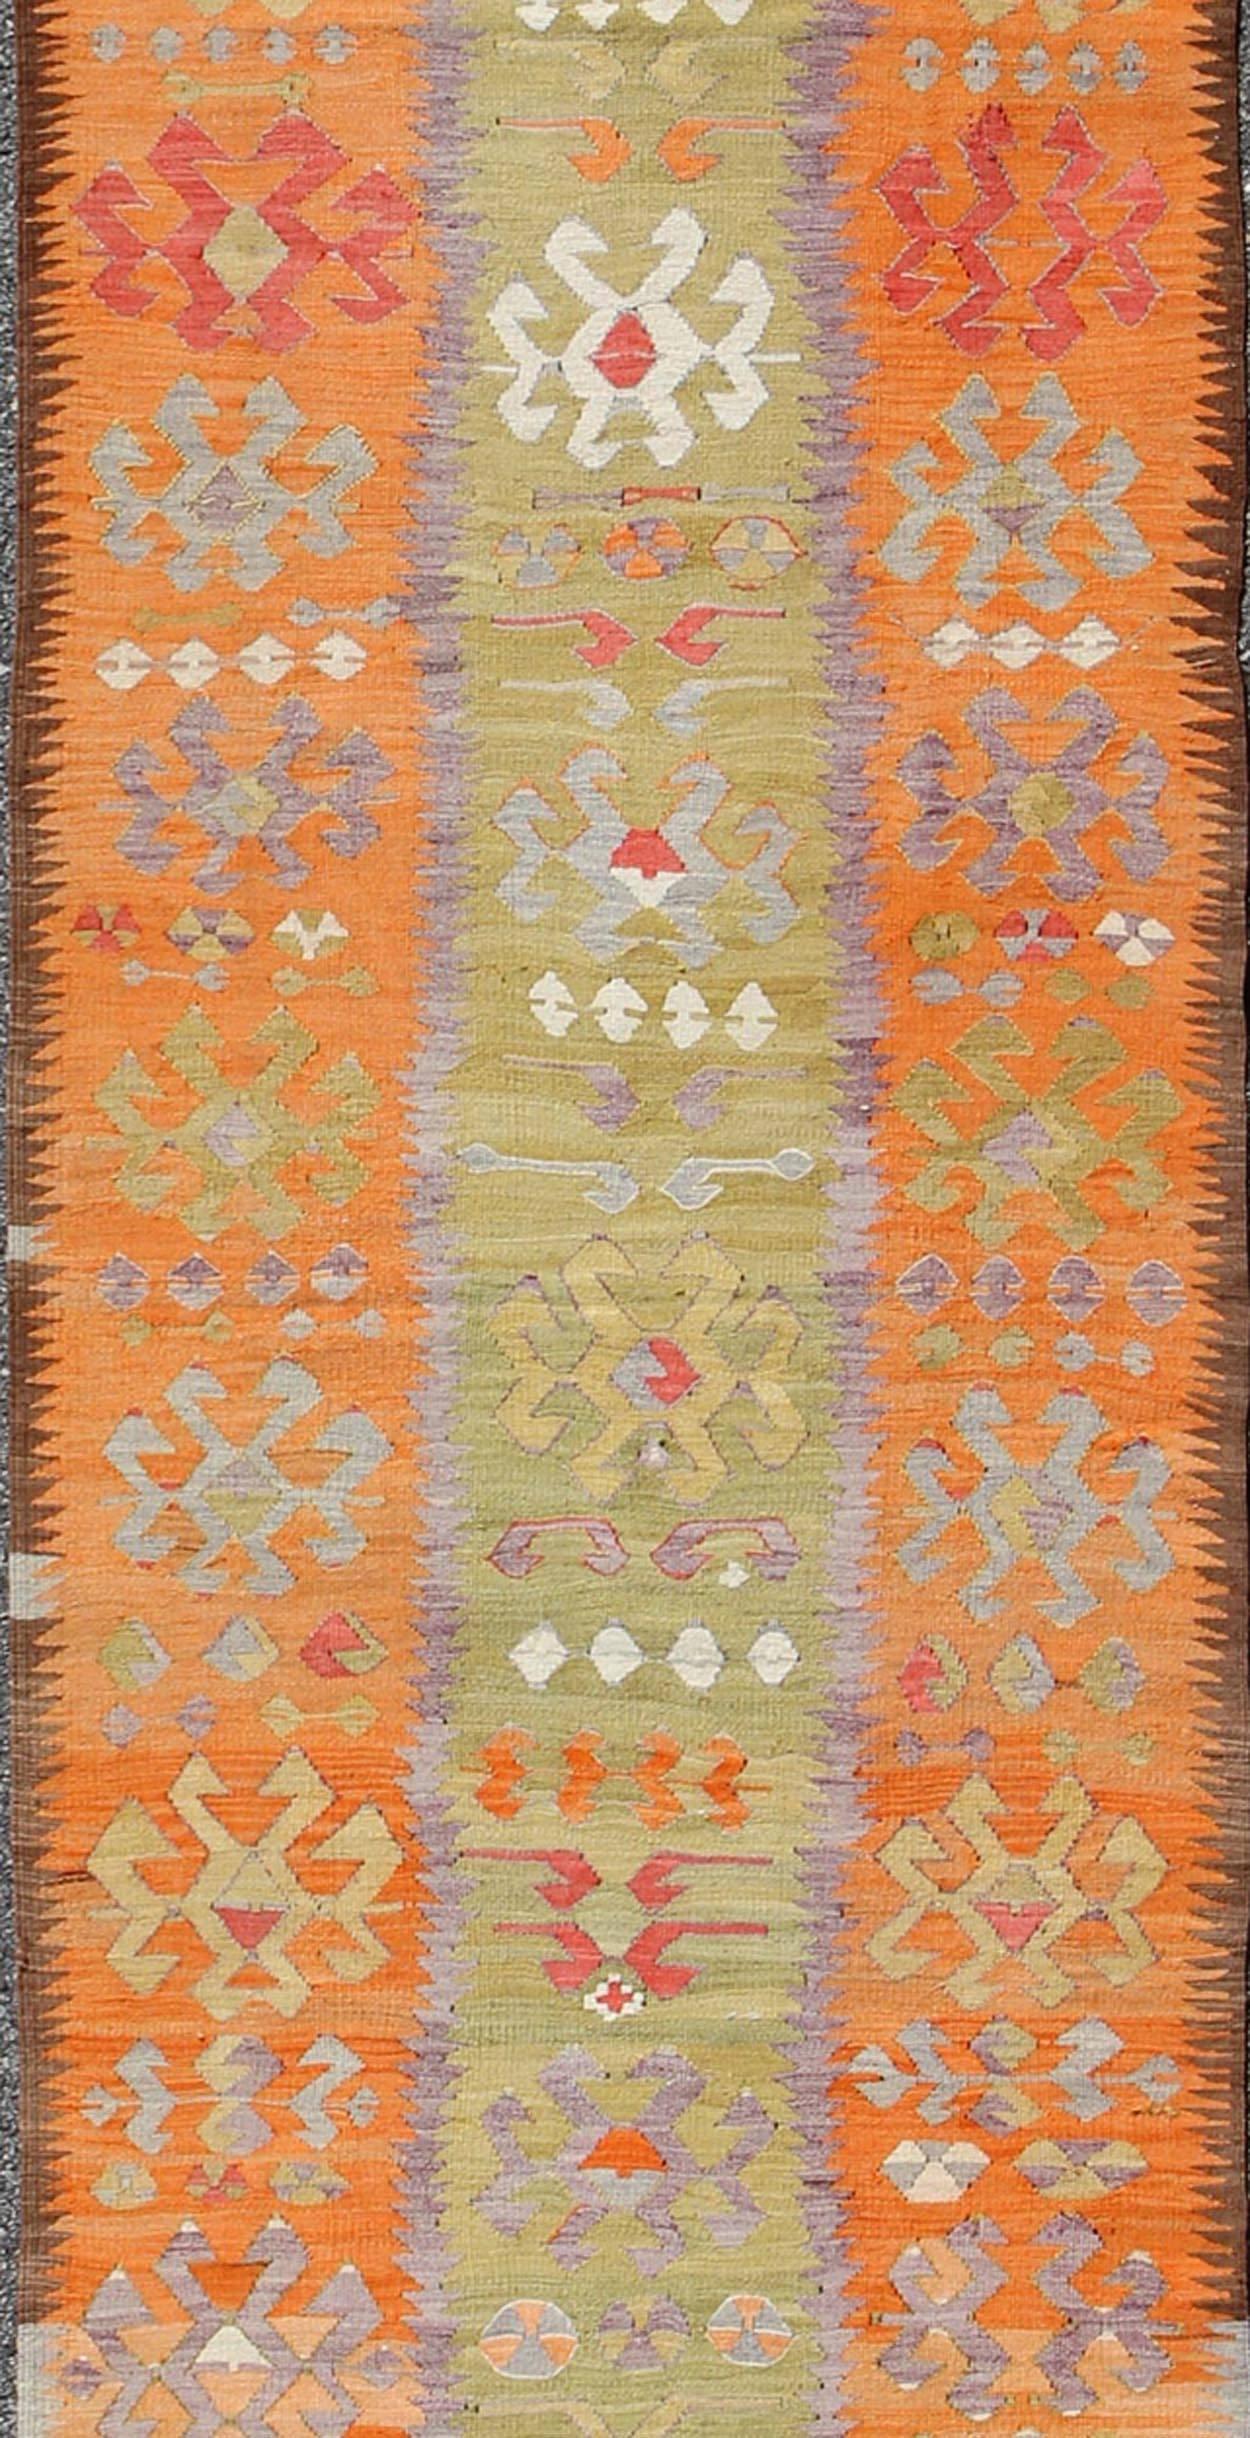 Turkish Long Kilim Runner with Tribal Design in Citron Green, Red and Orange